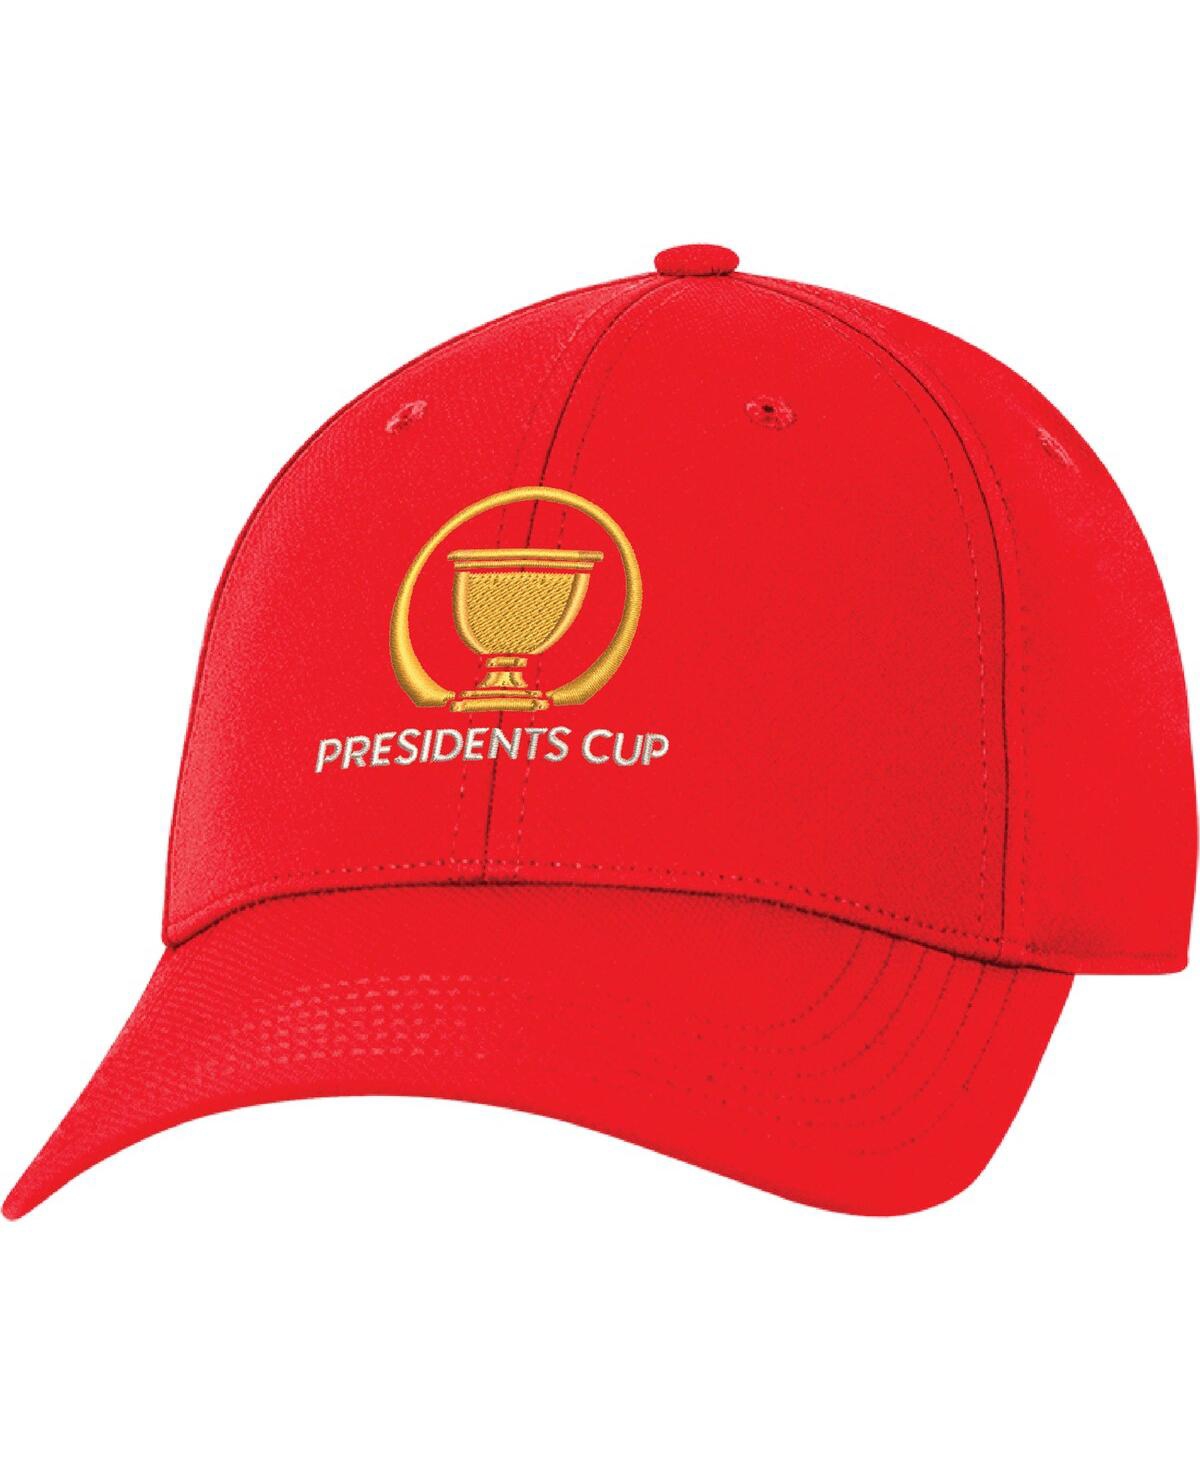 Men's and Women's Ahead Red 2024 Presidents Cup Stratus Adjustable Hat - Red